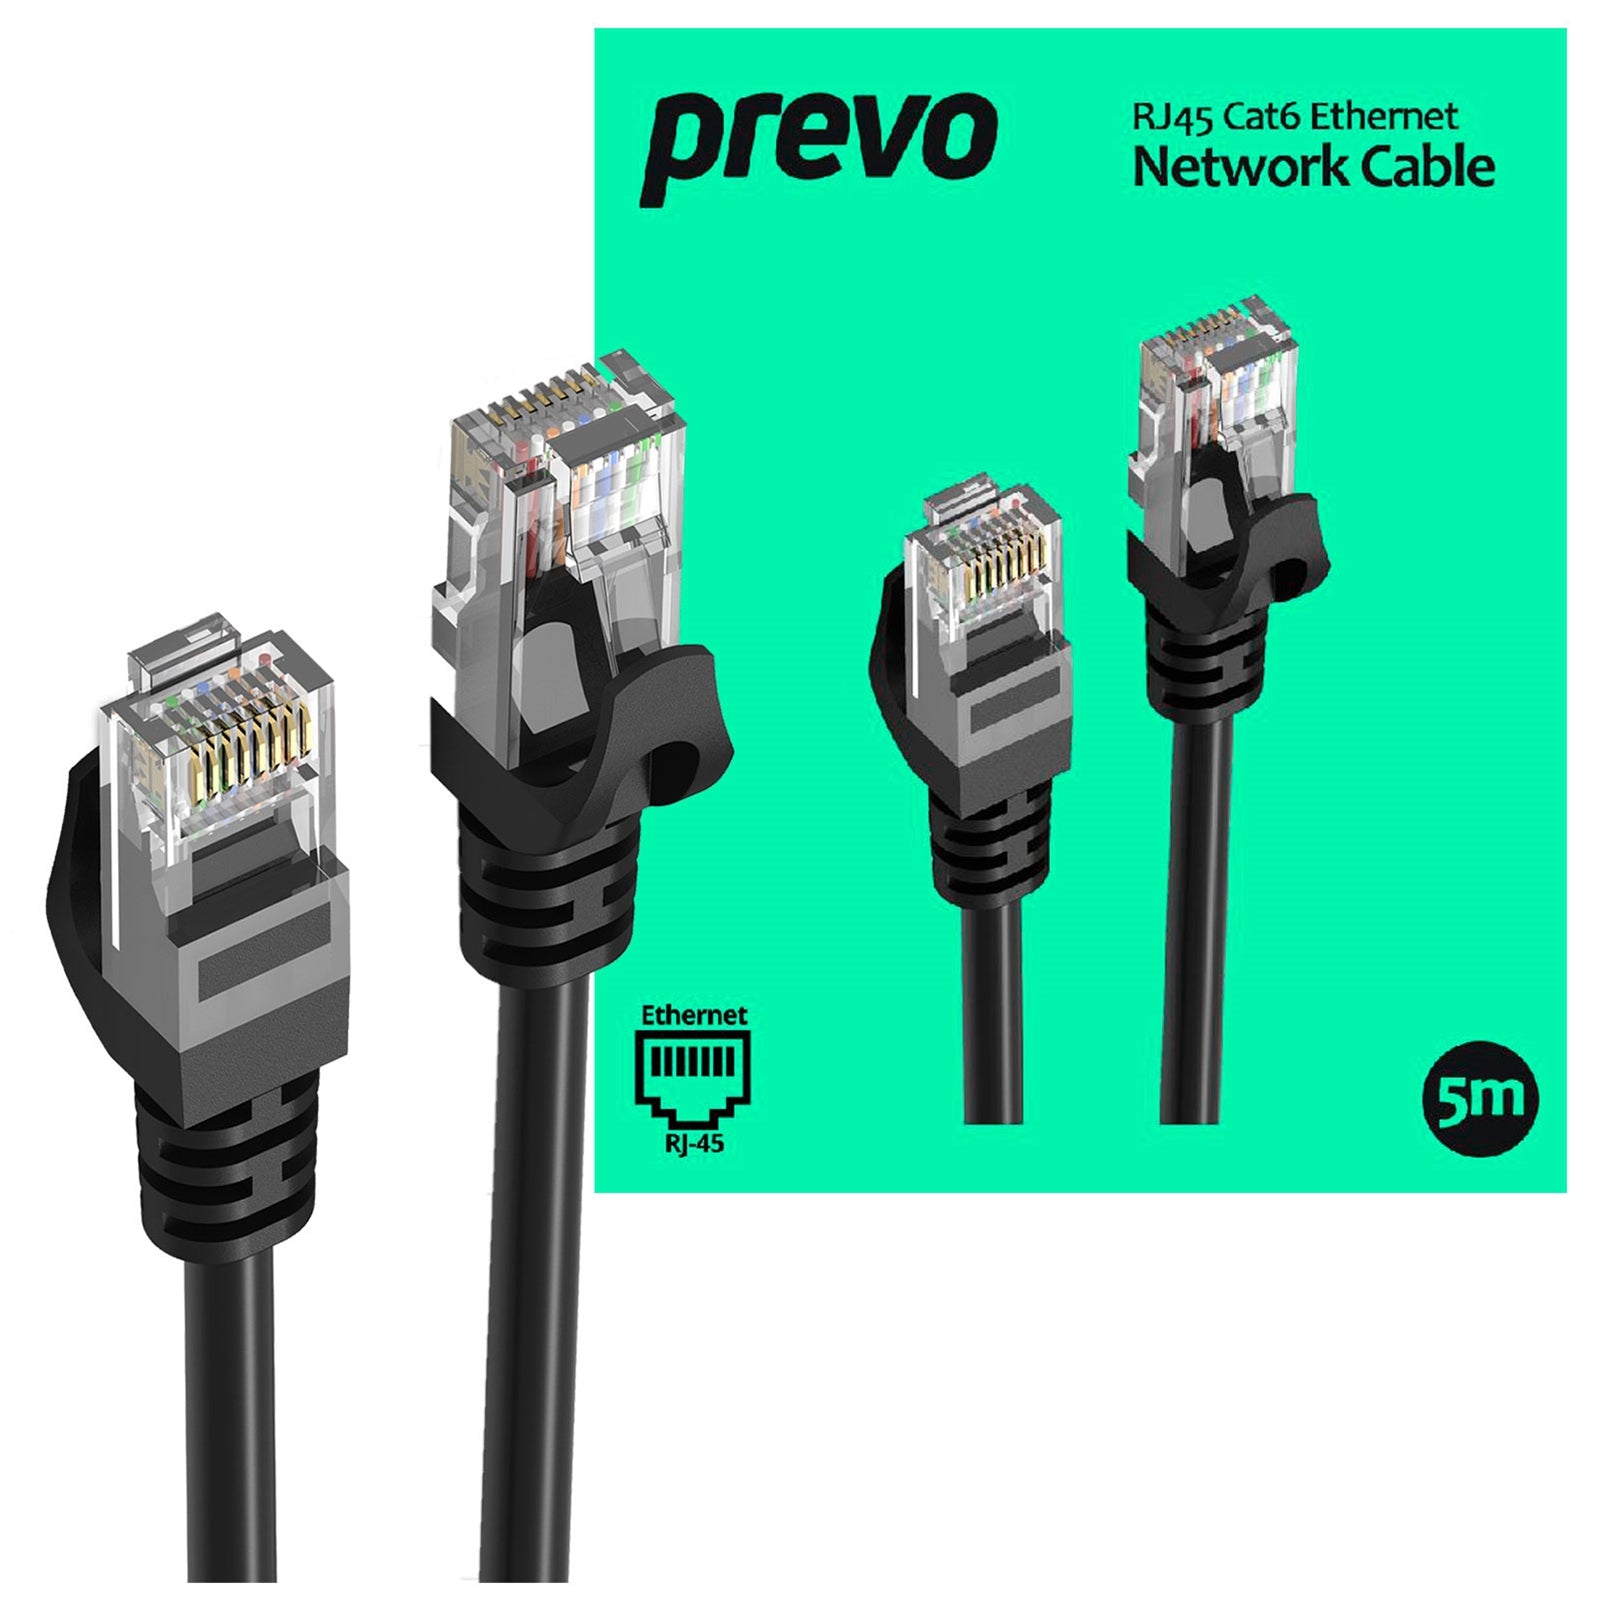 Prevo CAT6 Ethernet Network Cable - 5m Black